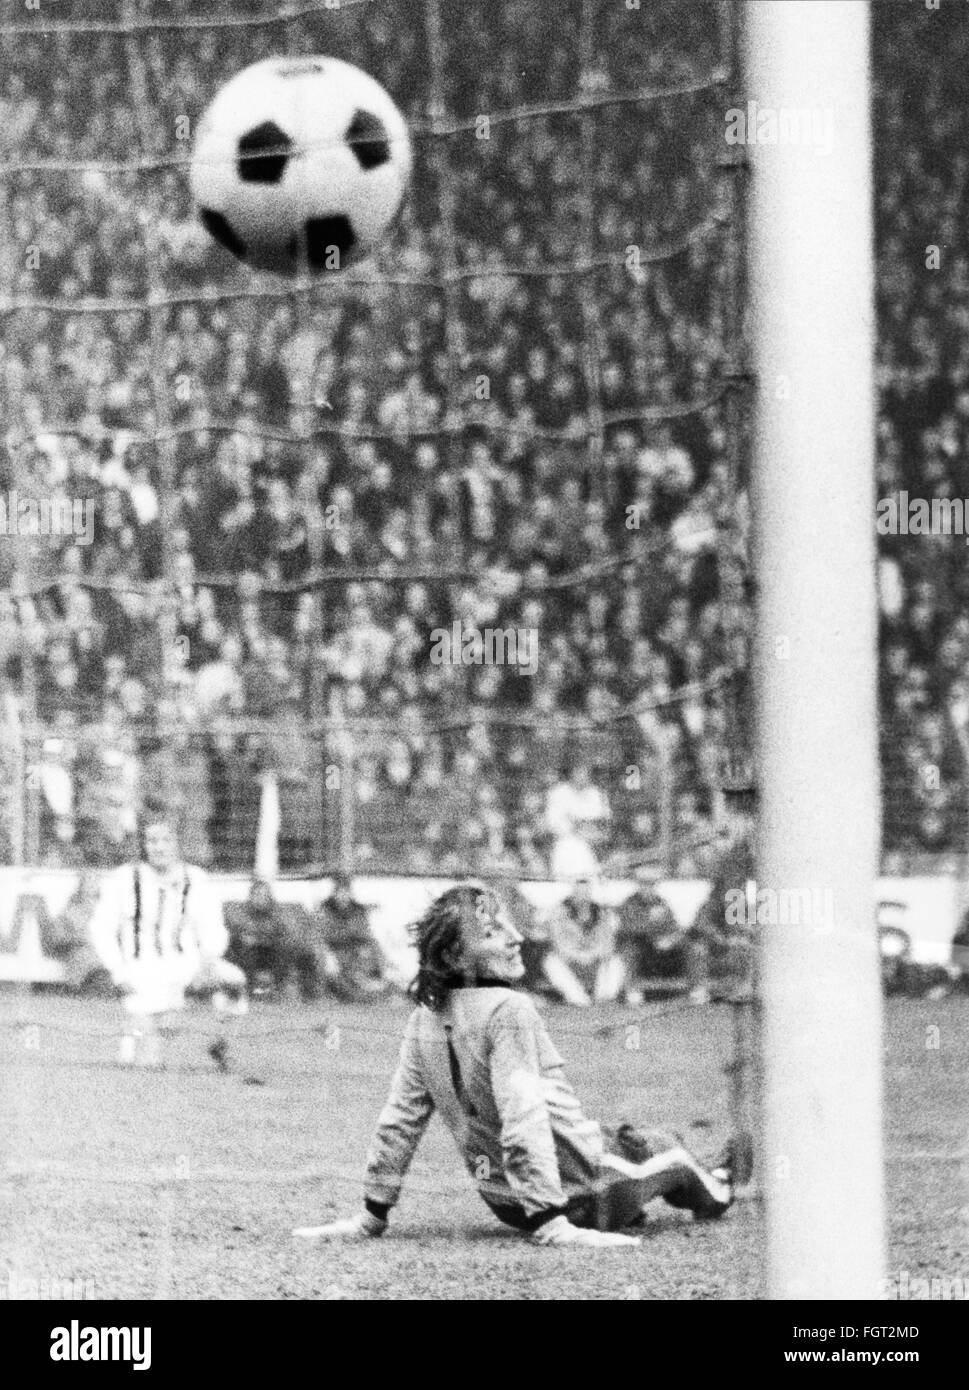 sports,football,game,Germany,national league,season 1972/ 1973,25th match day,game Borussia Moenchengladbach versus FC Bayern Muenchen(4: 2),Boekelbergstadion,17.3.1973,goal keeper Wolfgang Kleff on the ground during 3: 0 for Munich,Boekelberg,sports stadium,sports stadiums,football stadium,soccer stadium,football stadiums,soccer stadiums,nets,goal net,football match,soccer match,football matches,footballer,footballers,kicker,football player,football players,ball,playing,play,West Germany,Western Germany,Germany,1970s,70s,20,Additional-Rights-Clearences-Not Available Stock Photo